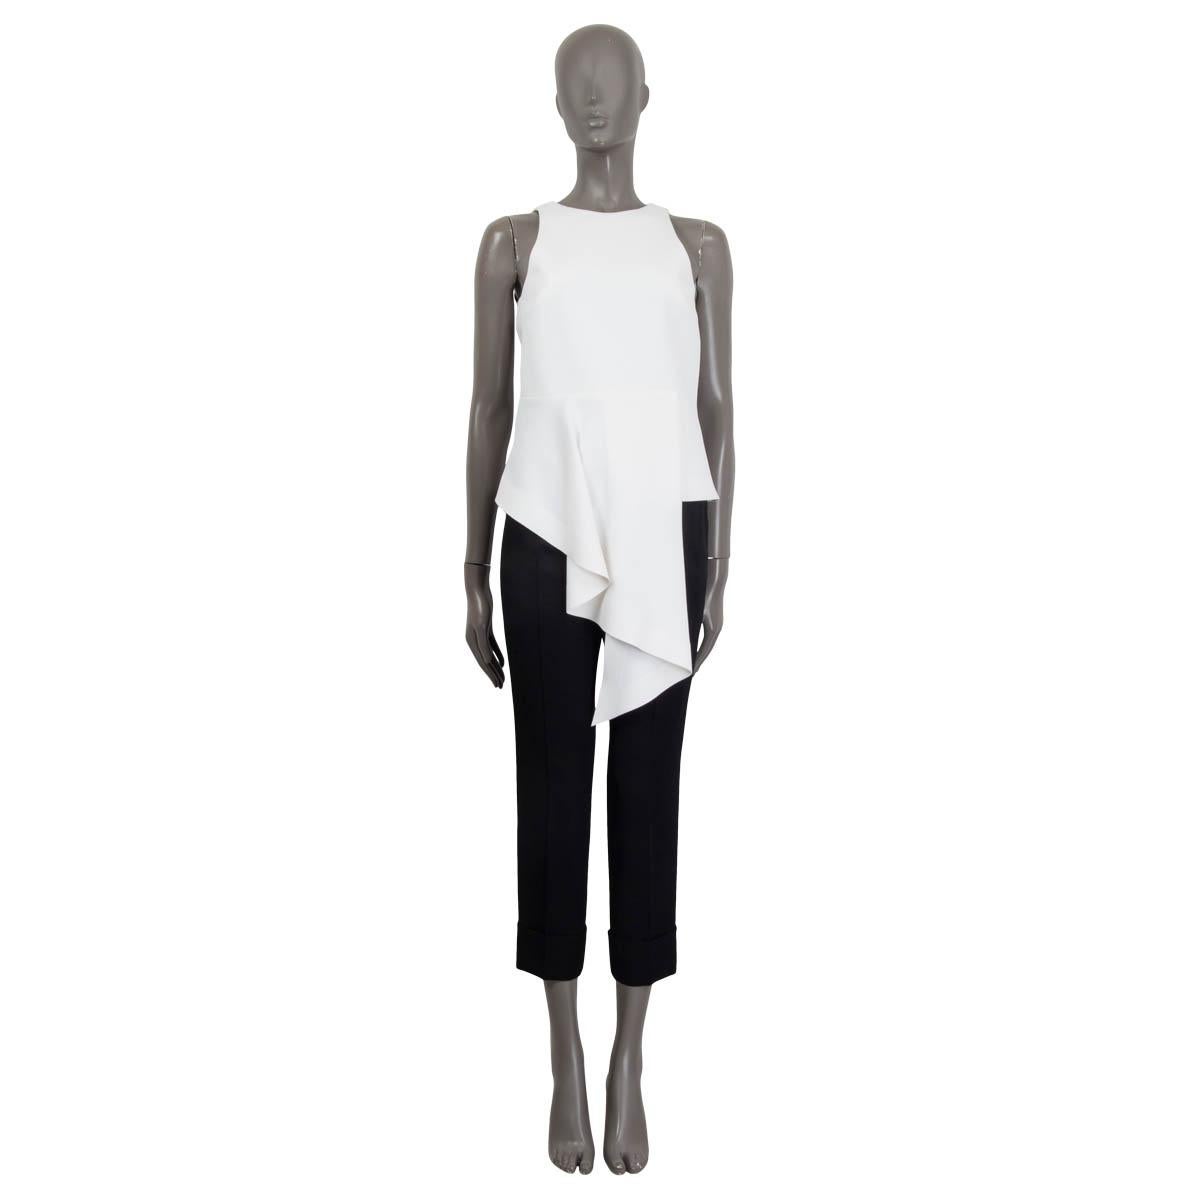 100% authentic Balenciaga sleeveless asymmetrical top in white polyester (90%) and elastane (10%). Opens with a hook and a zipper at the back. Semi-lined in white acetate (72%) and silk (28%). Has been worn and is in excellent condition.